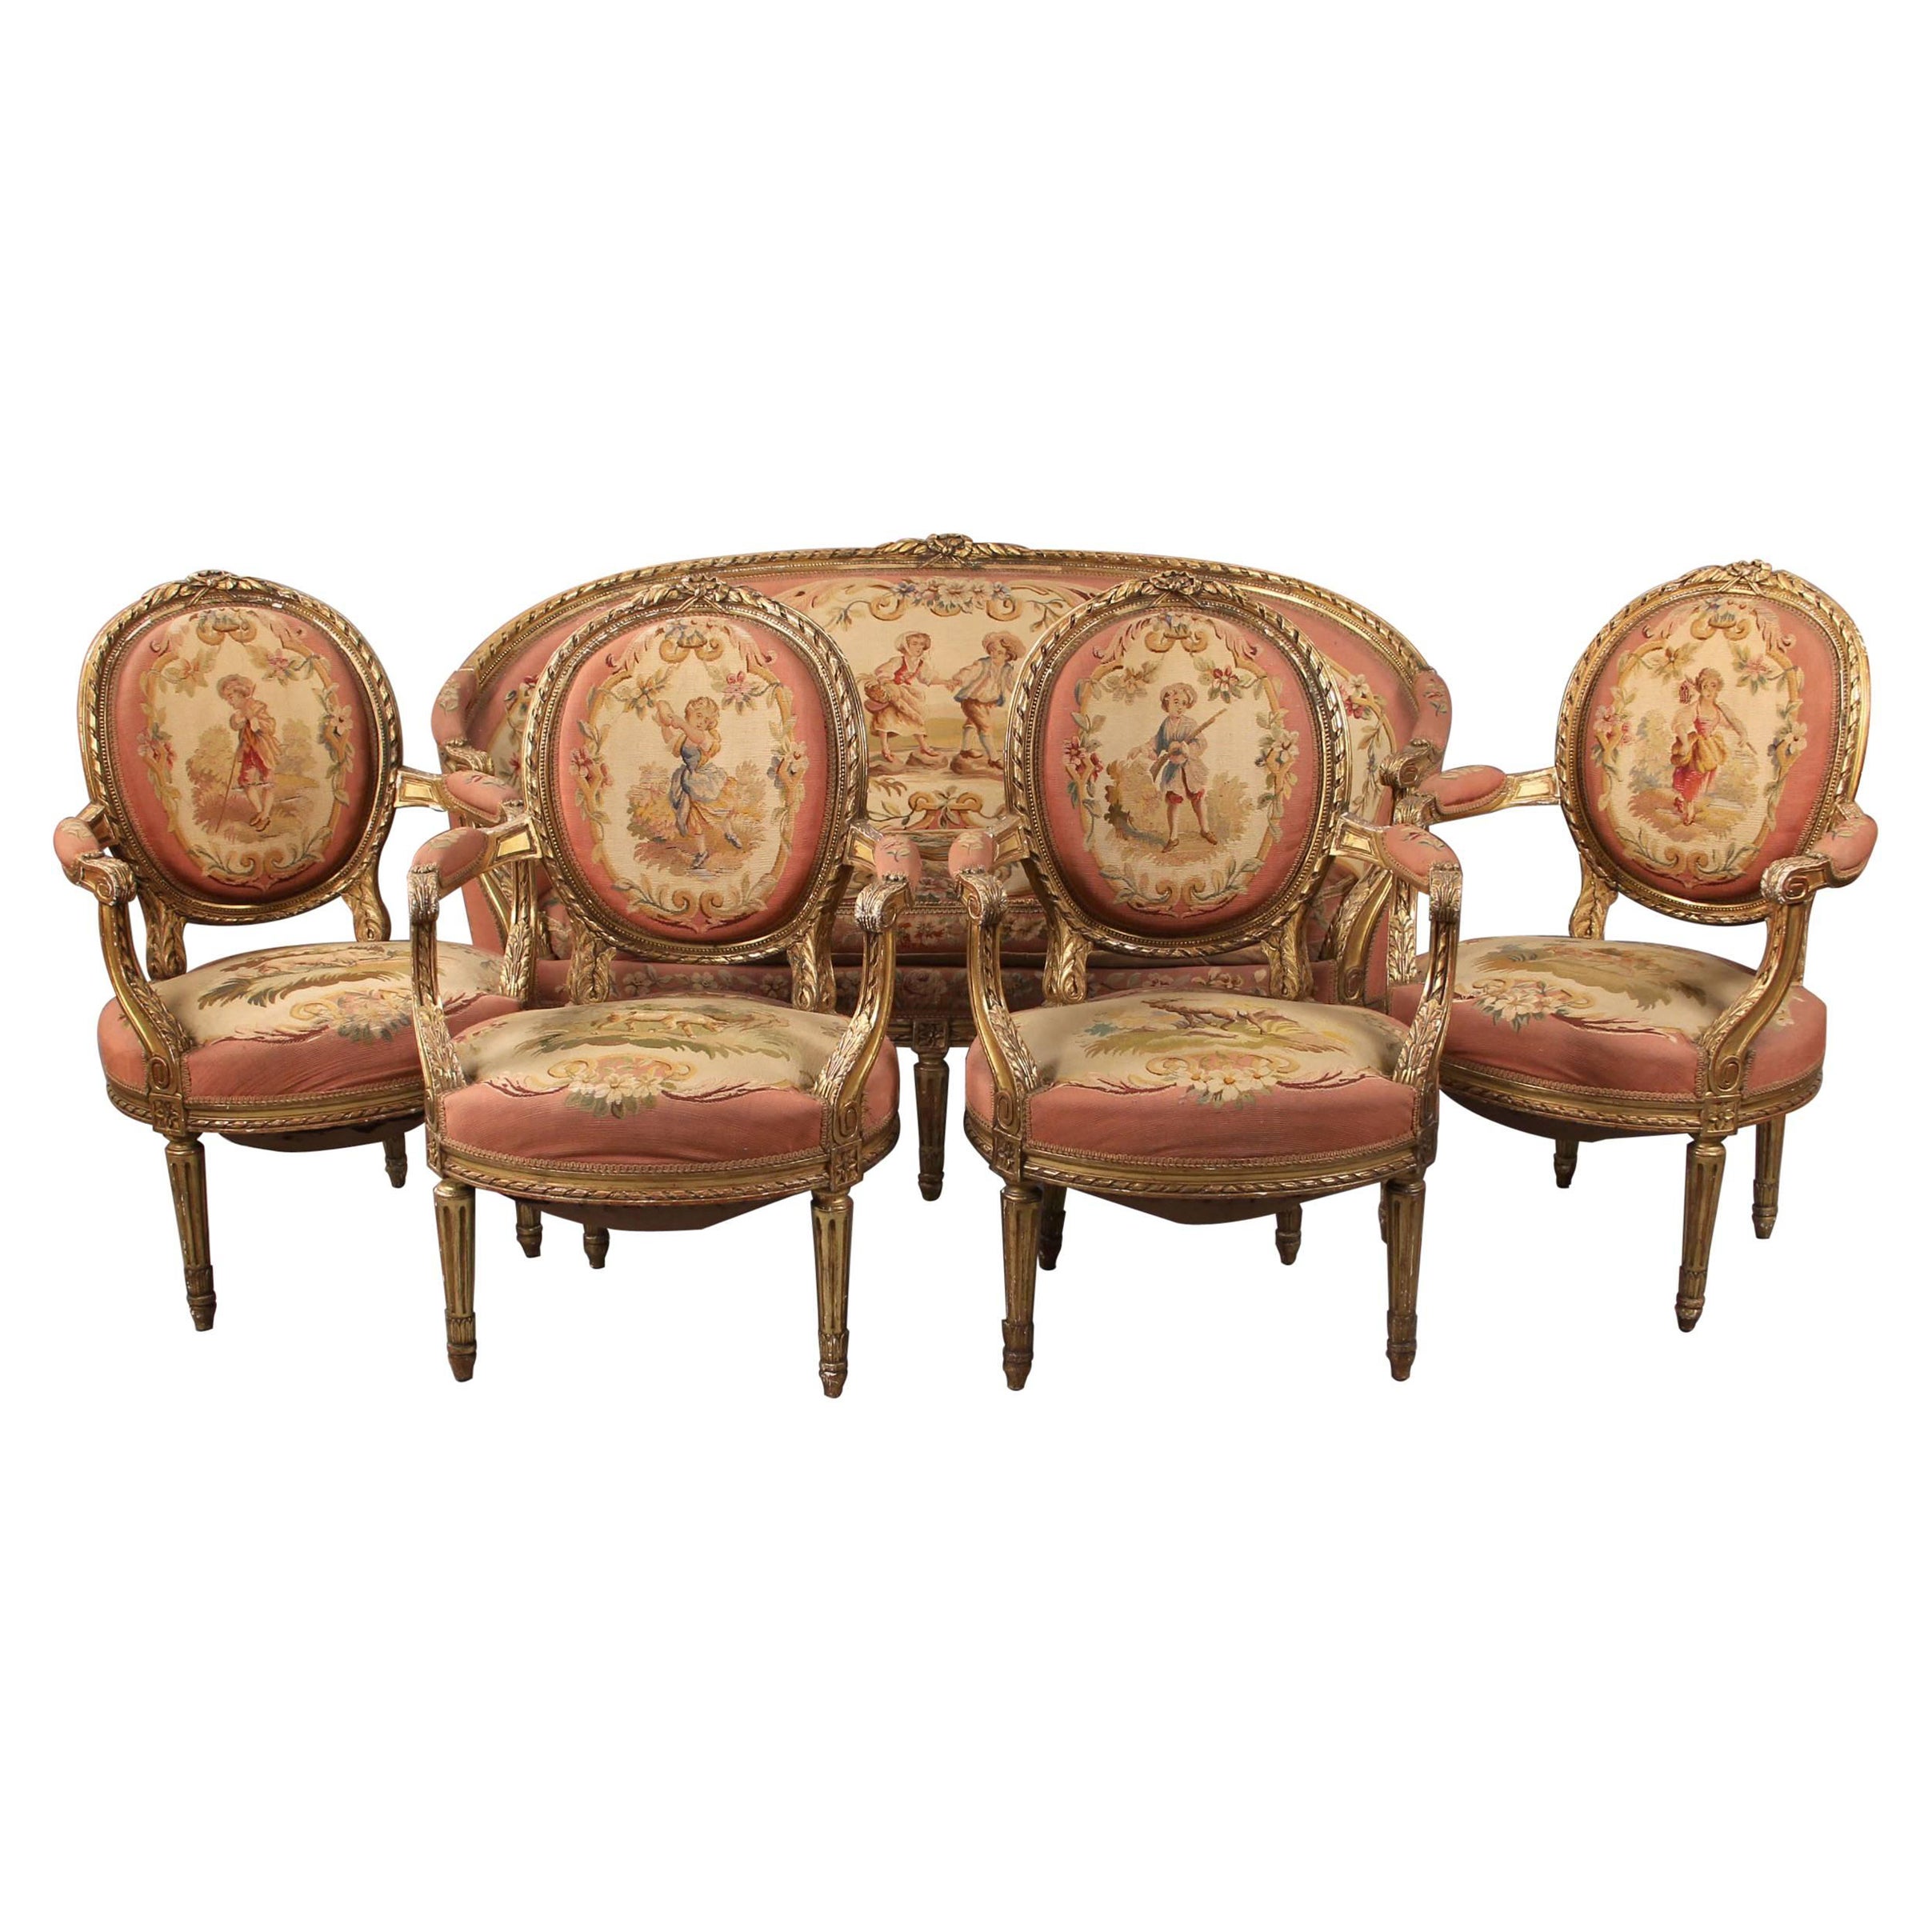 Beautiful Late 19th Century Five-Piece Carved Giltwood Aubusson Parlor Set For Sale